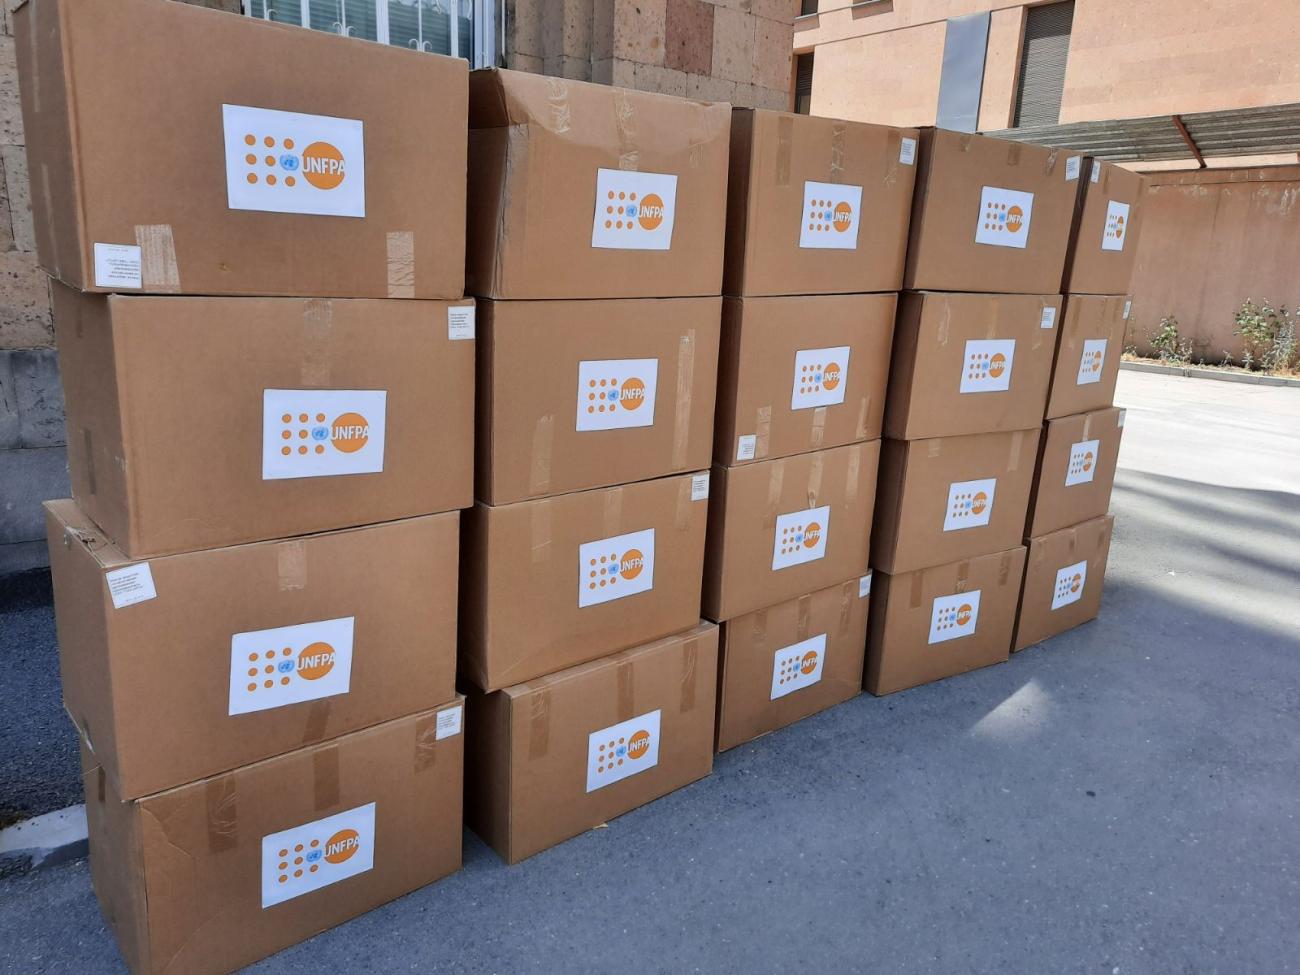 Boxes of PPE provided by UNFPA.